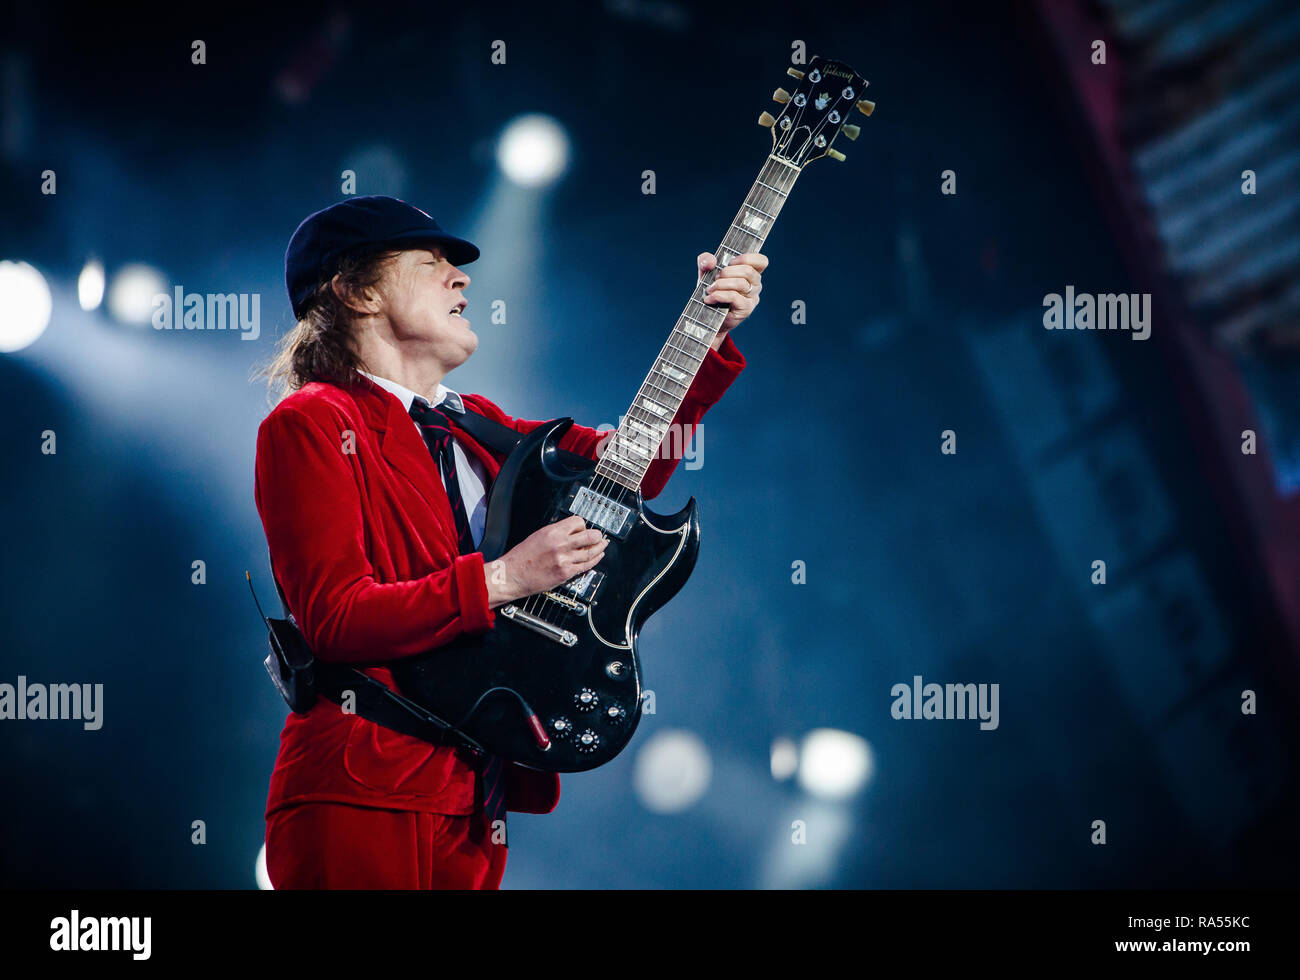 The Australian rock band AC/DC performs a live concert at Ceres Park in Aarhus as part of the Rock or Bust World 2016 Tour. Here musician and guitarist Angus Young is seen live on stage. Denmark, 12/06 2016. EXCLUDING DENMARK Stock Photo